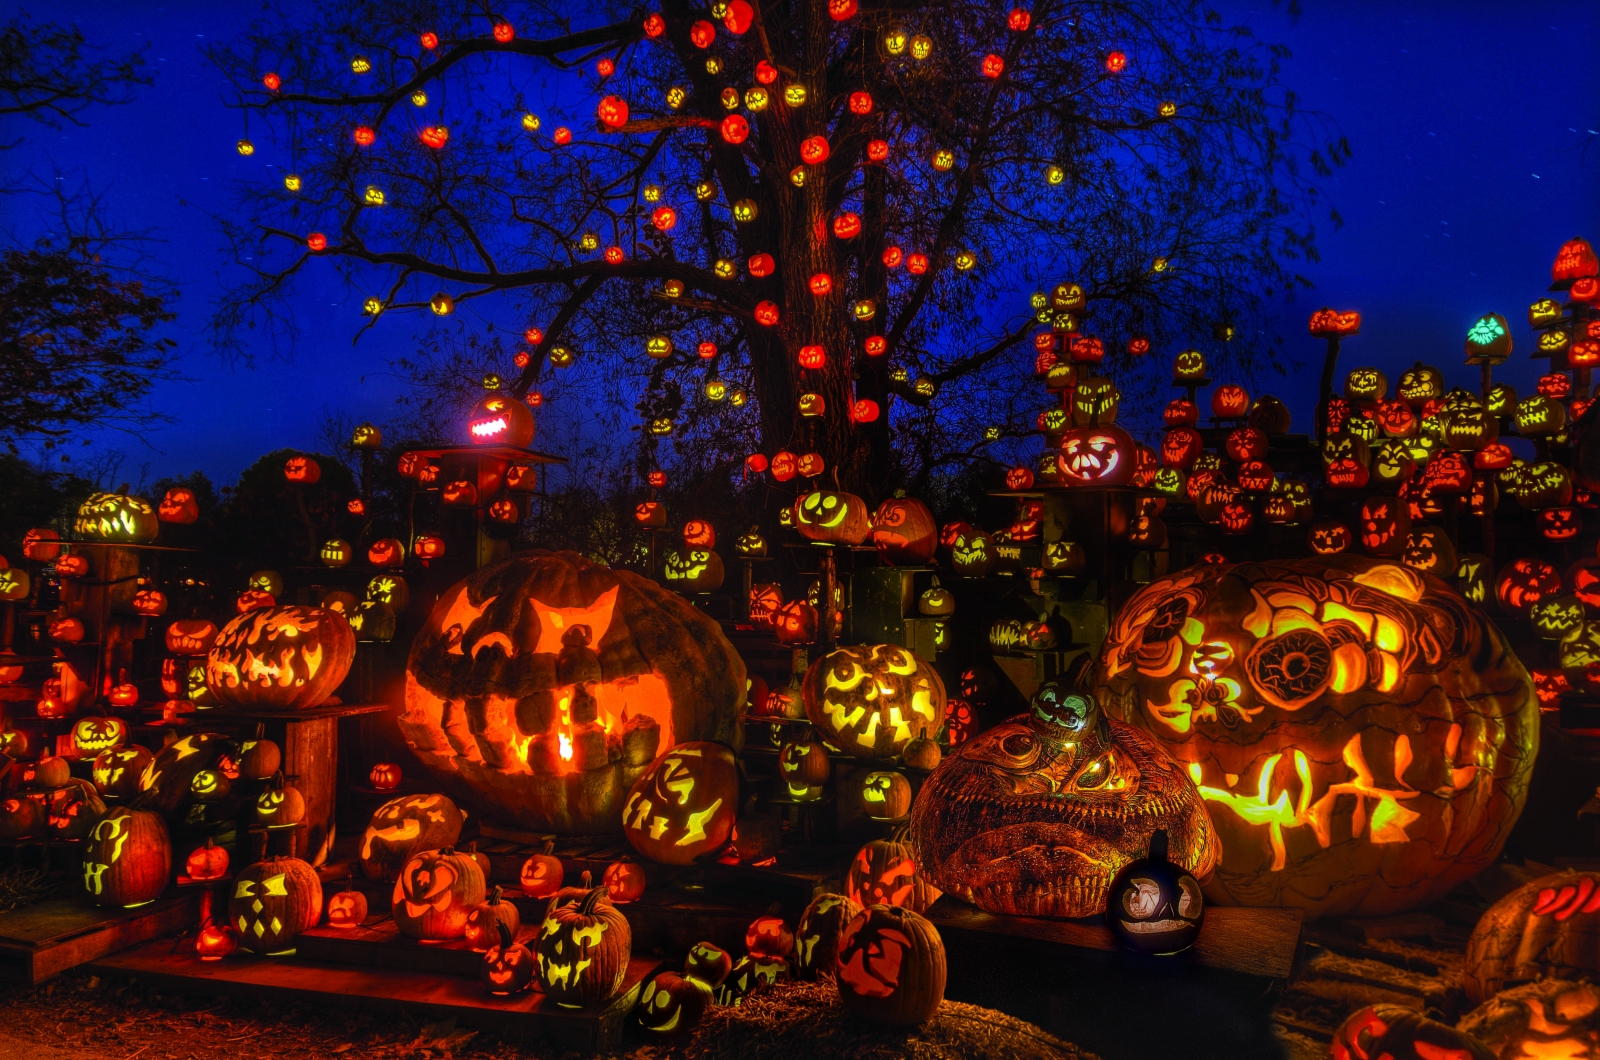 The Jack-O-Lantern Spectacular at the Minnesota Zoo lines the trail with thousands of illuminated pumpkins. Courtesy Minnesota Zoo.